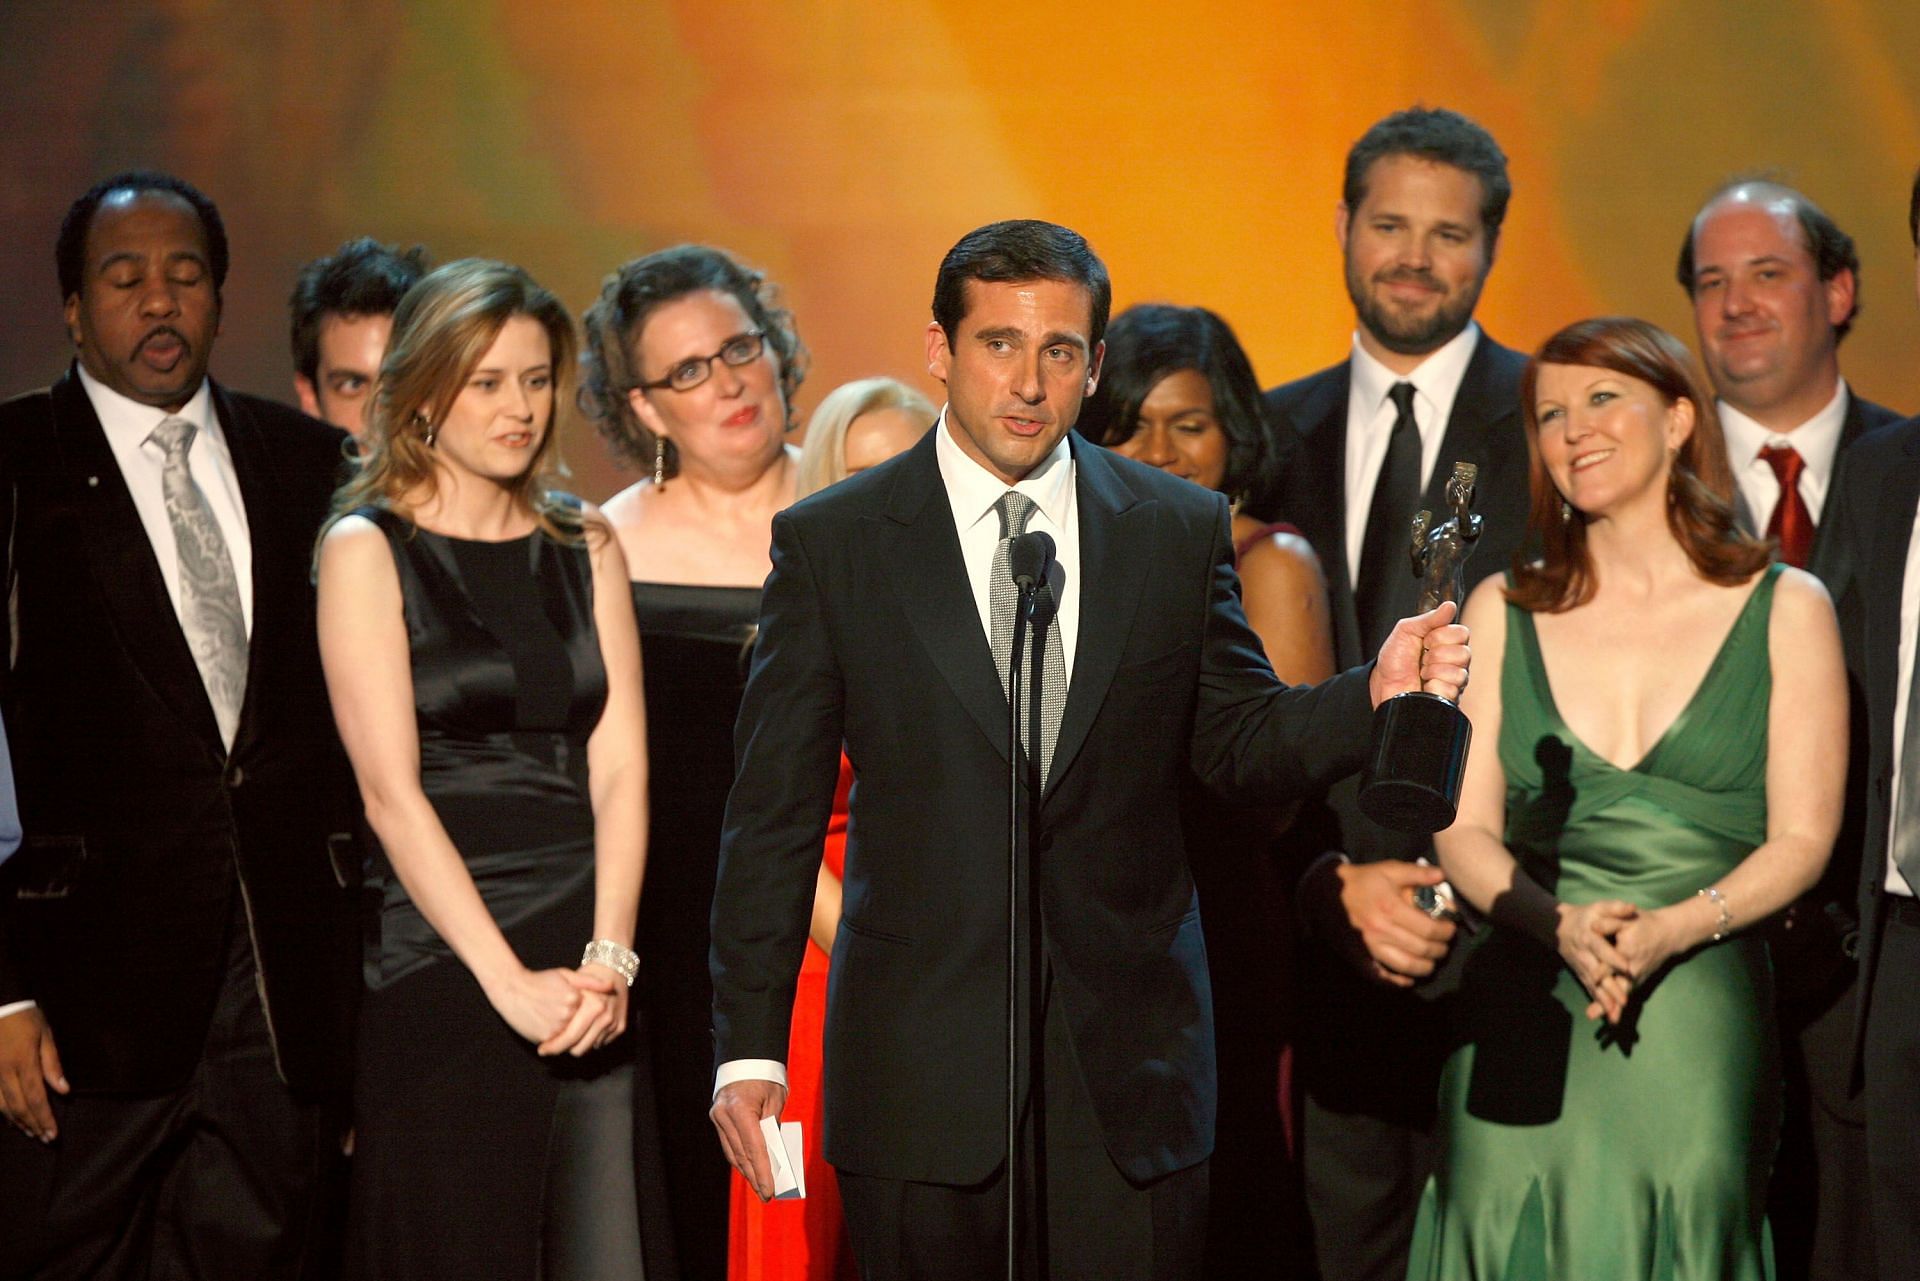 The cast and crew of &quot;The Office&quot; at the 13th SAG Awards (Image via Getty/Kevin Winter)